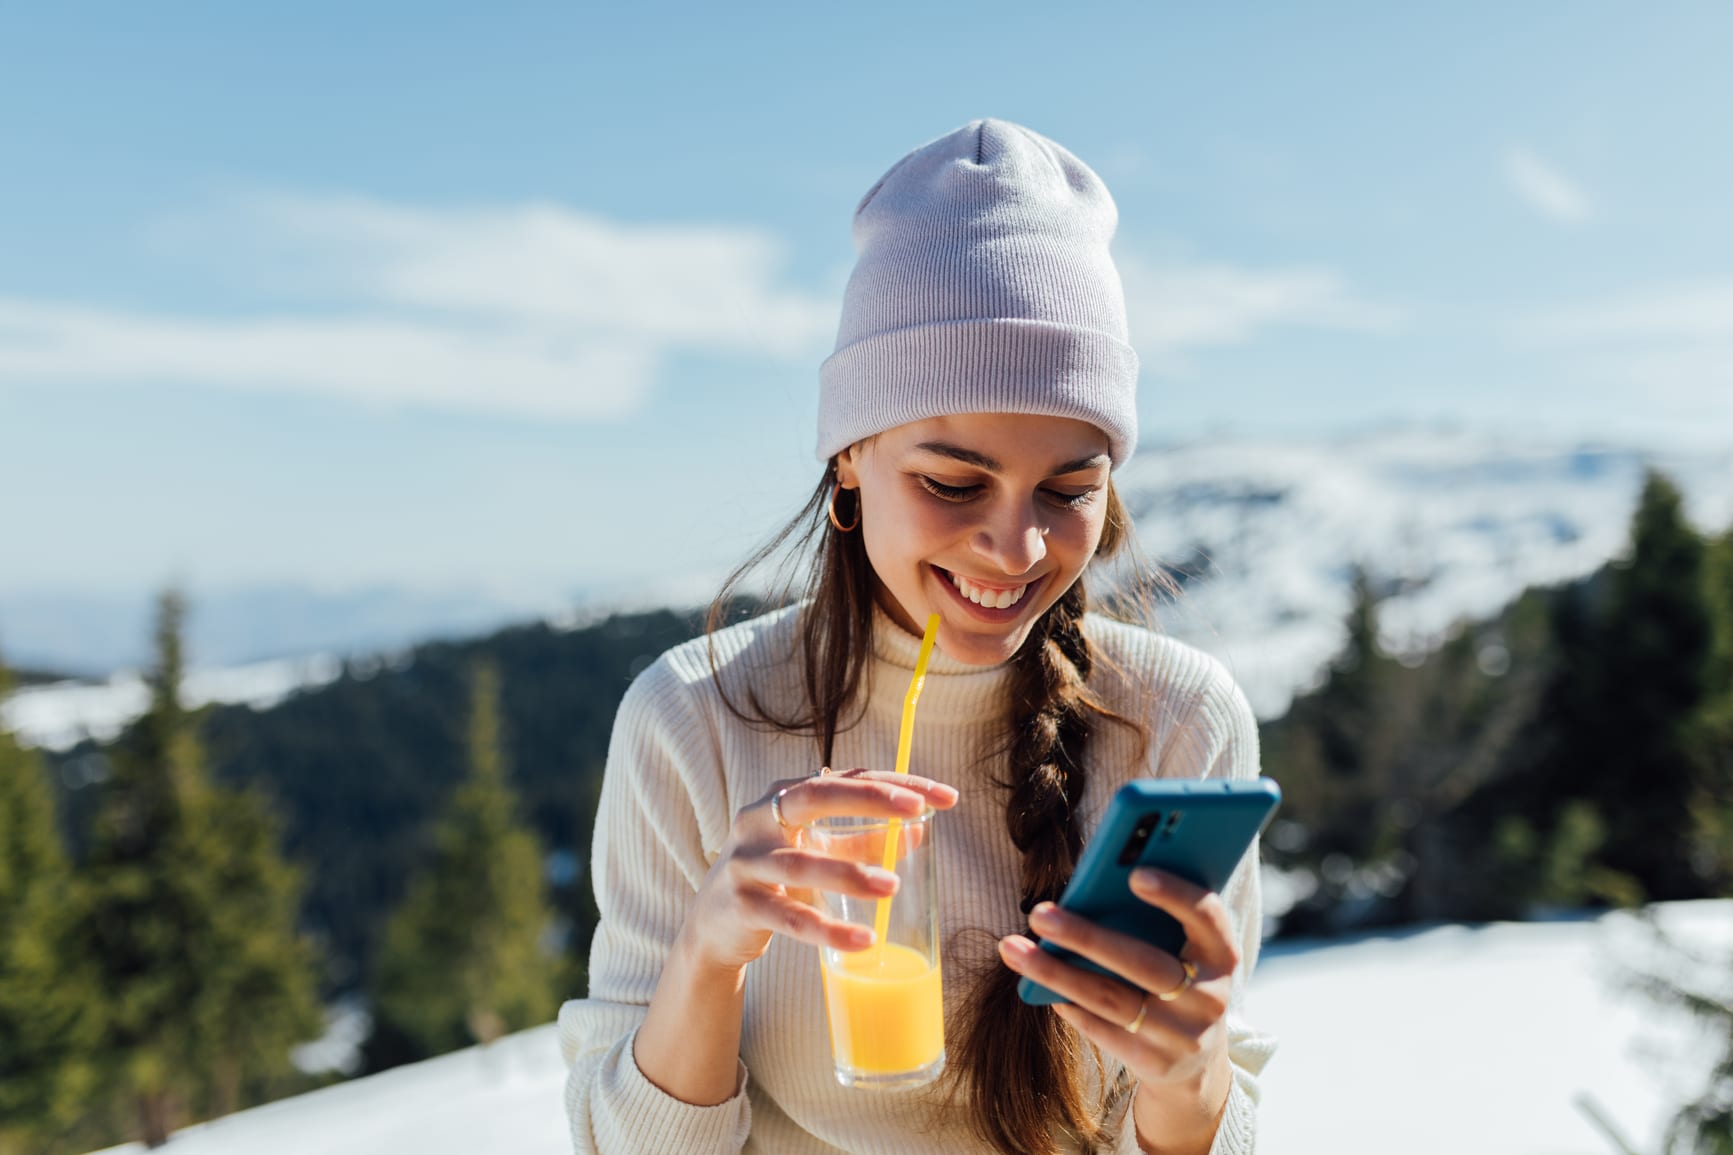 Young woman sitting outside in ski bar, using cellphone, drinking beverage and enjoying the sunny day.